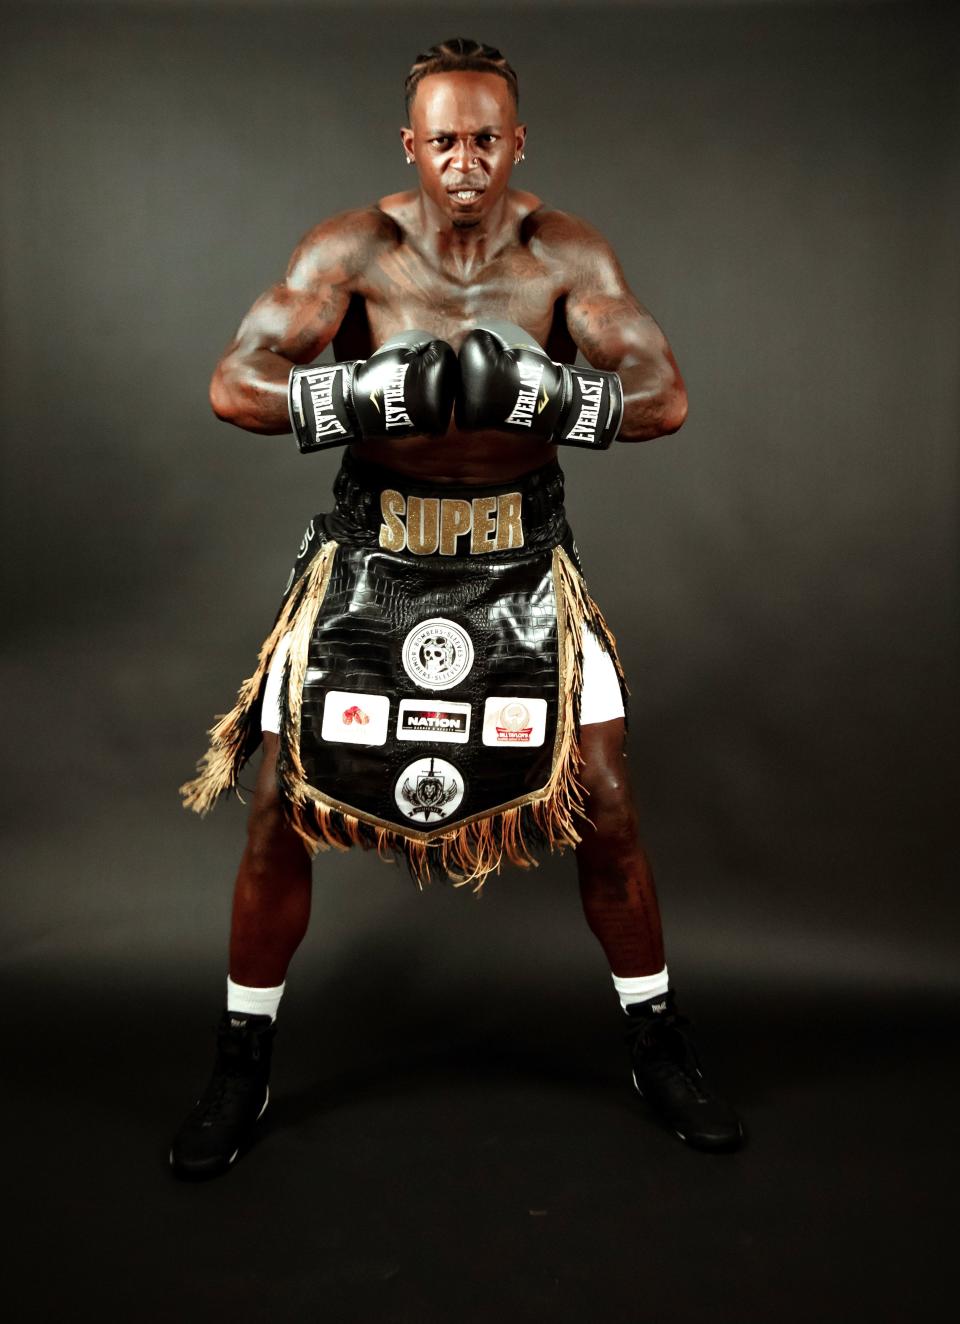 For $40 a ticket, watch a live pro boxing show in Murfreesboro on Saturday, July 23. At the Embassy Suites, 1200 Conference Center Boulevard, join DJ Keith Pride as Tri-Star Boxing makes its return from 5 p.m. until 10 p.m. All ages are welcome.